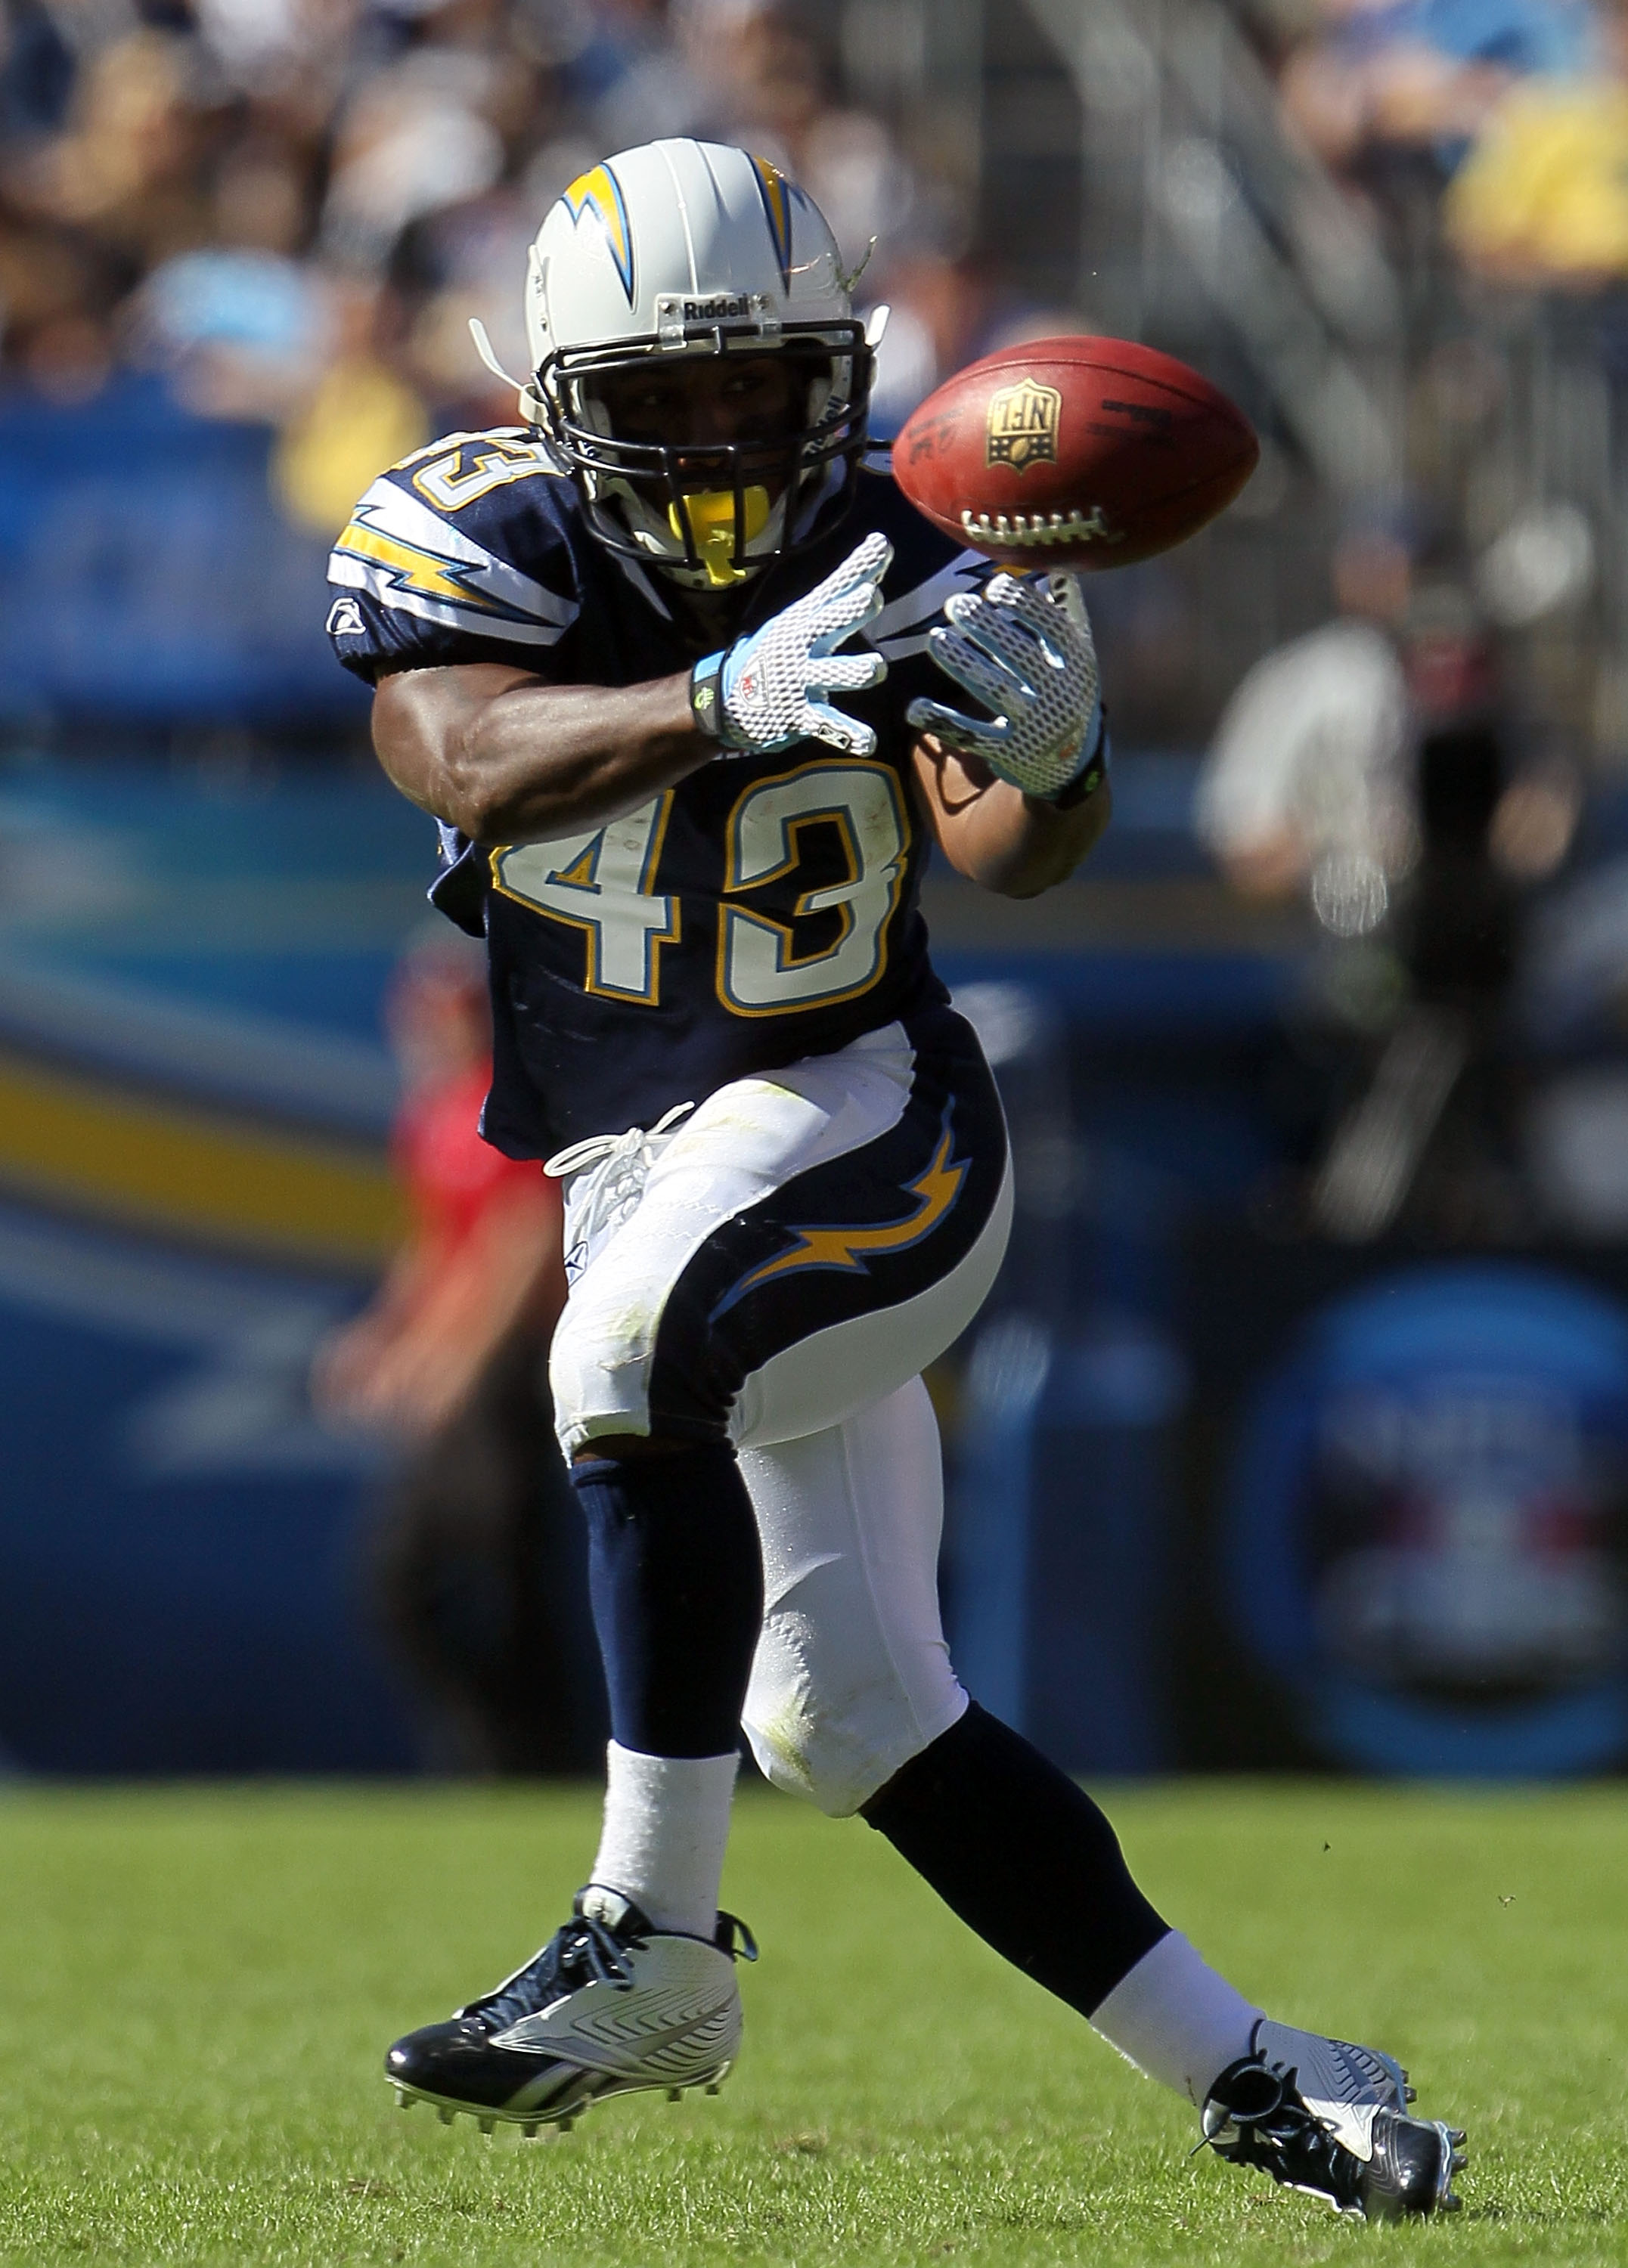 SAN DIEGO - OCTOBER 31:  Darren Sproles #43 of the San Diego Chargers plays in the game against the Tennessee Titans at Qualcomm Stadium on October 31, 2010 in San Diego, California. The Chargers defeated the Titans 33-25.  (Photo by Jeff Gross/Getty Imag